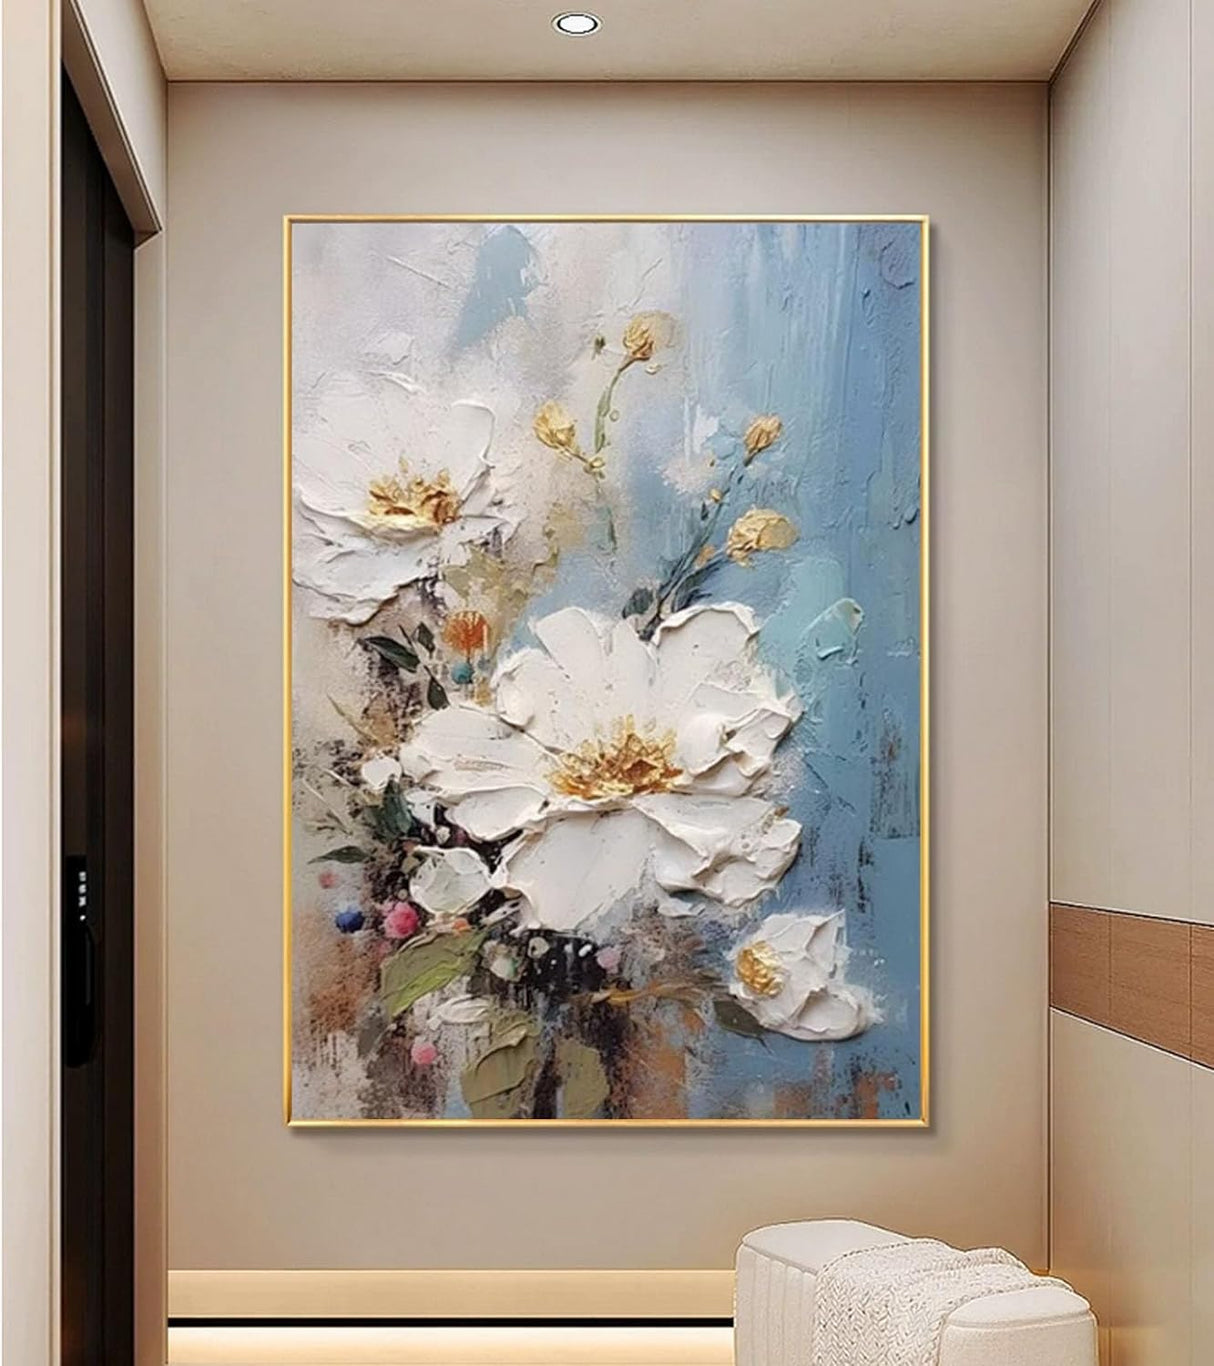 3D Textured Flower Framed Wall Art for Living Room,Hand-Painted White Floral Oil Painting on Canvas for Office,Large Canvas Pictures Modern Artwork for Bedroom Office Home Decor 28X40 Inches